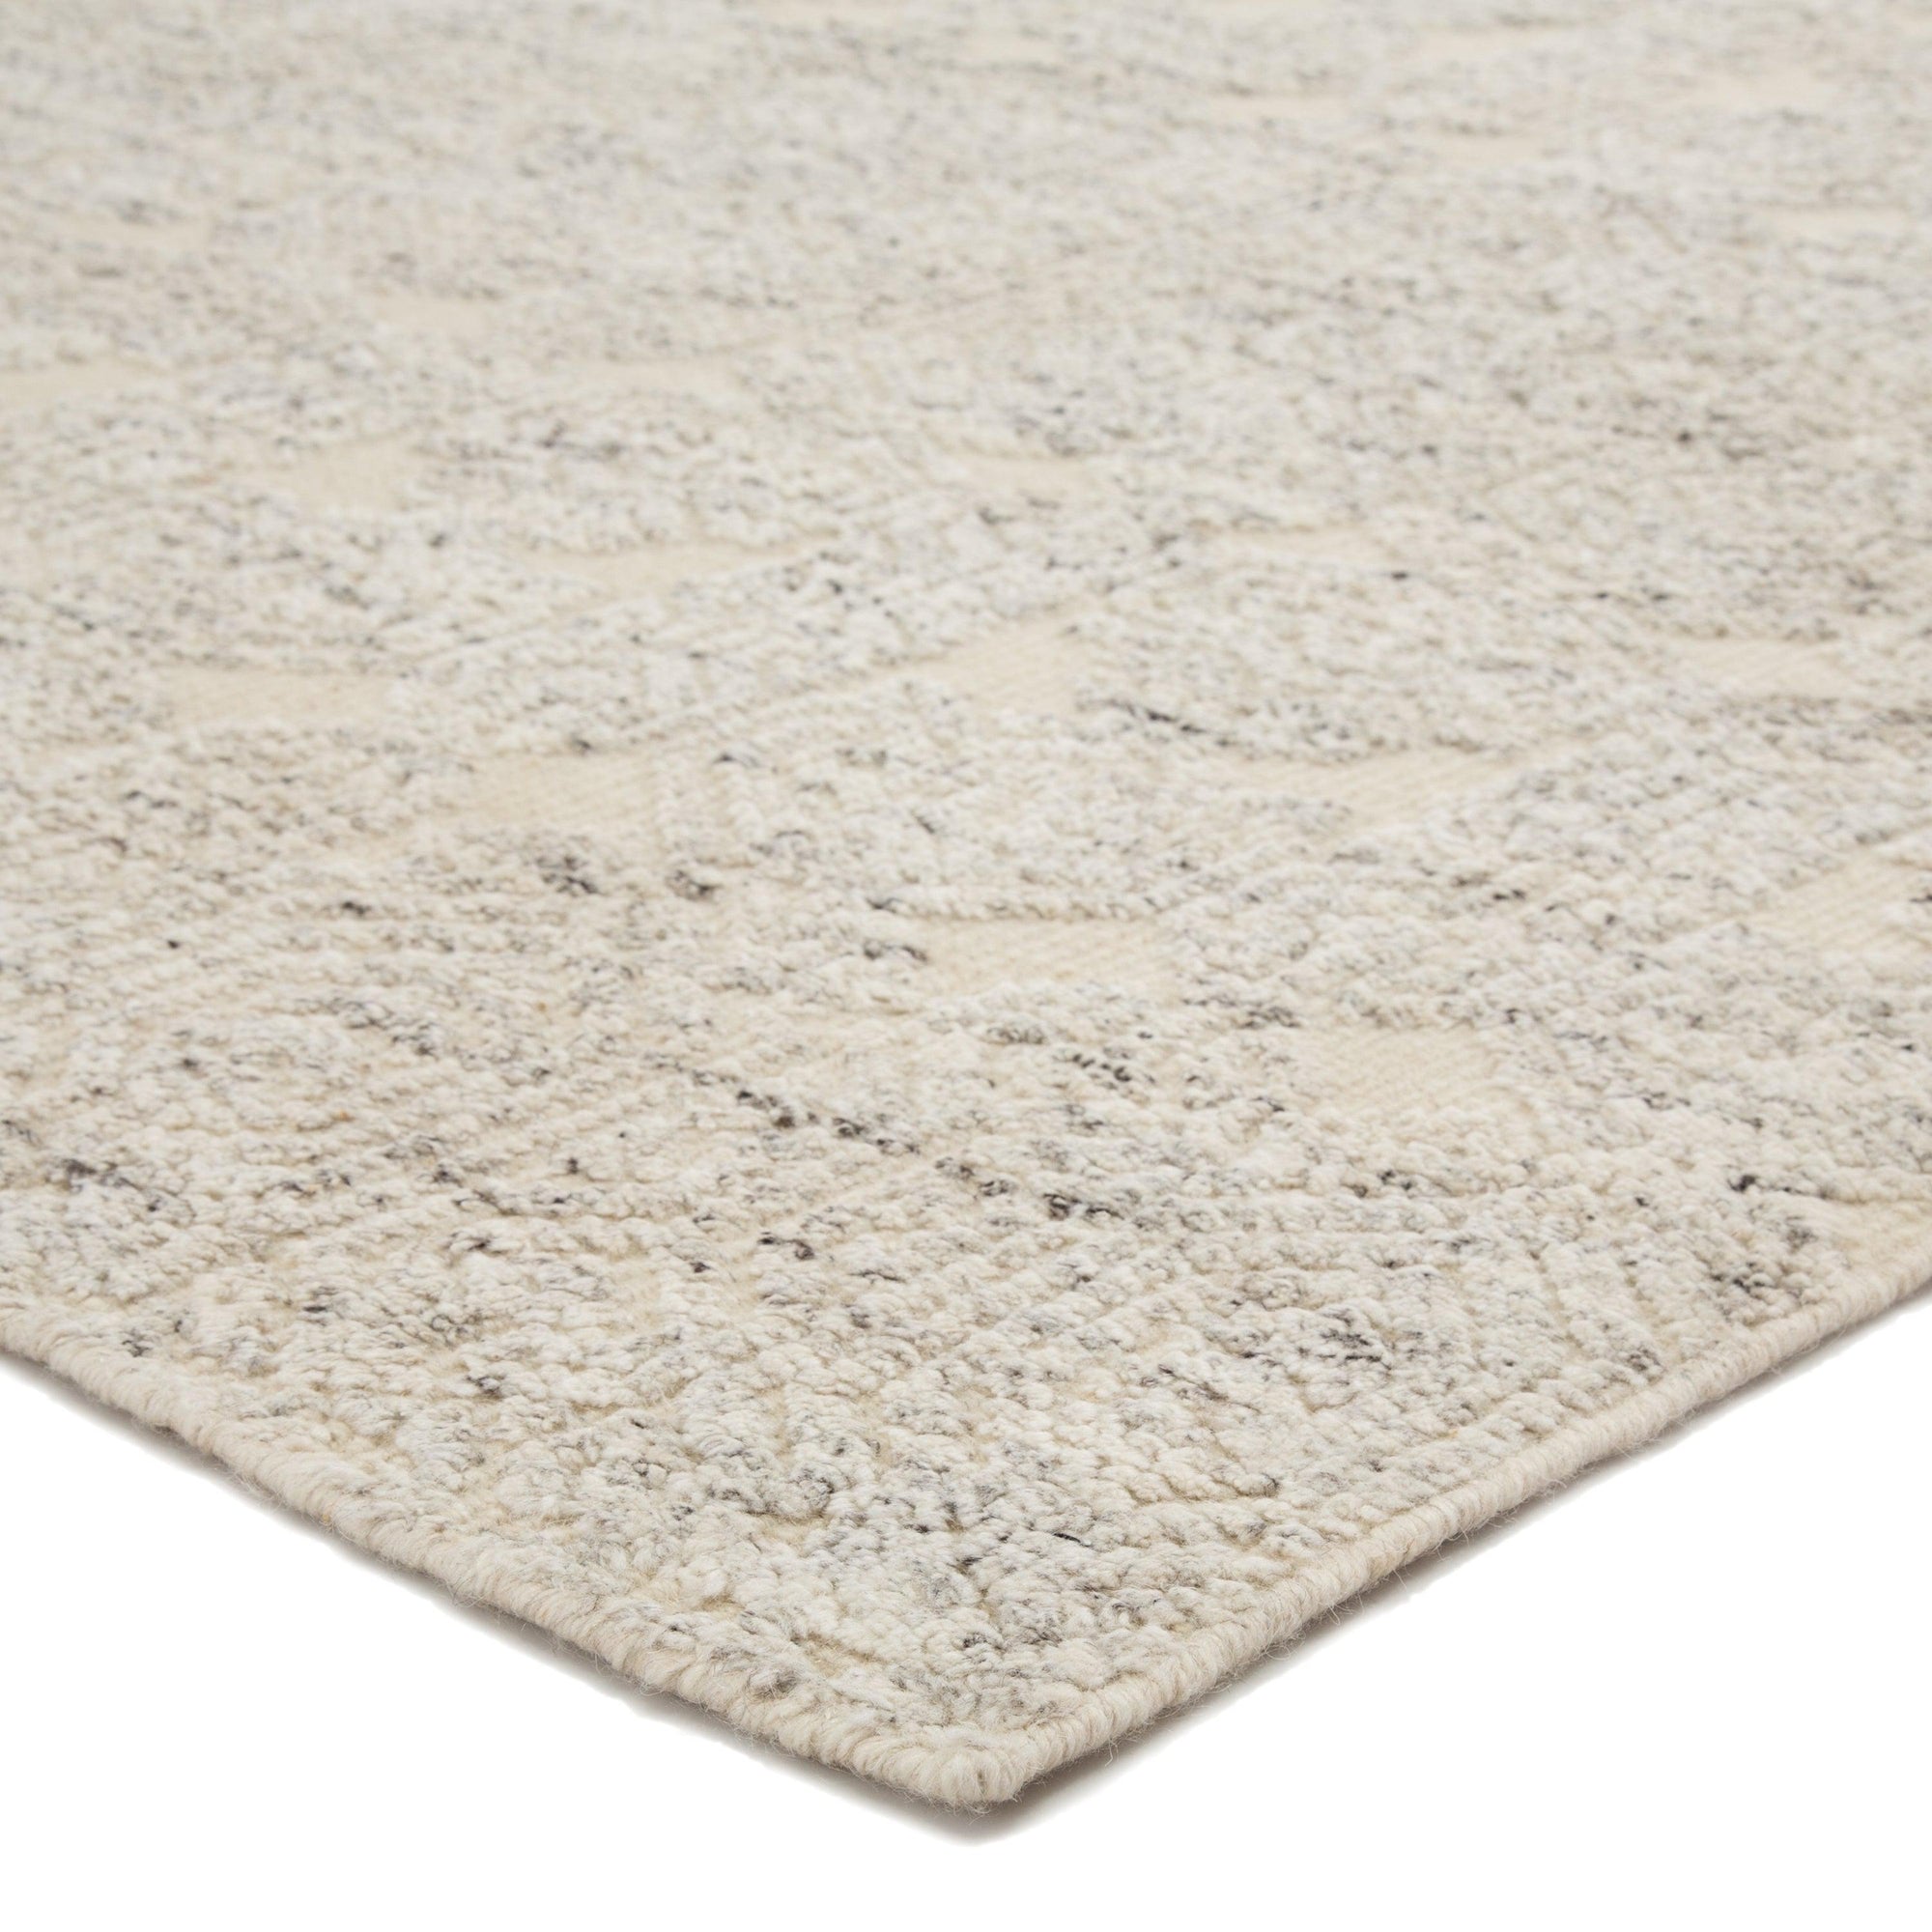 Rugs by Roo | Jaipur Living Abelle Hand-Knotted Medallion Gray Beige Area Rug-RUG143904